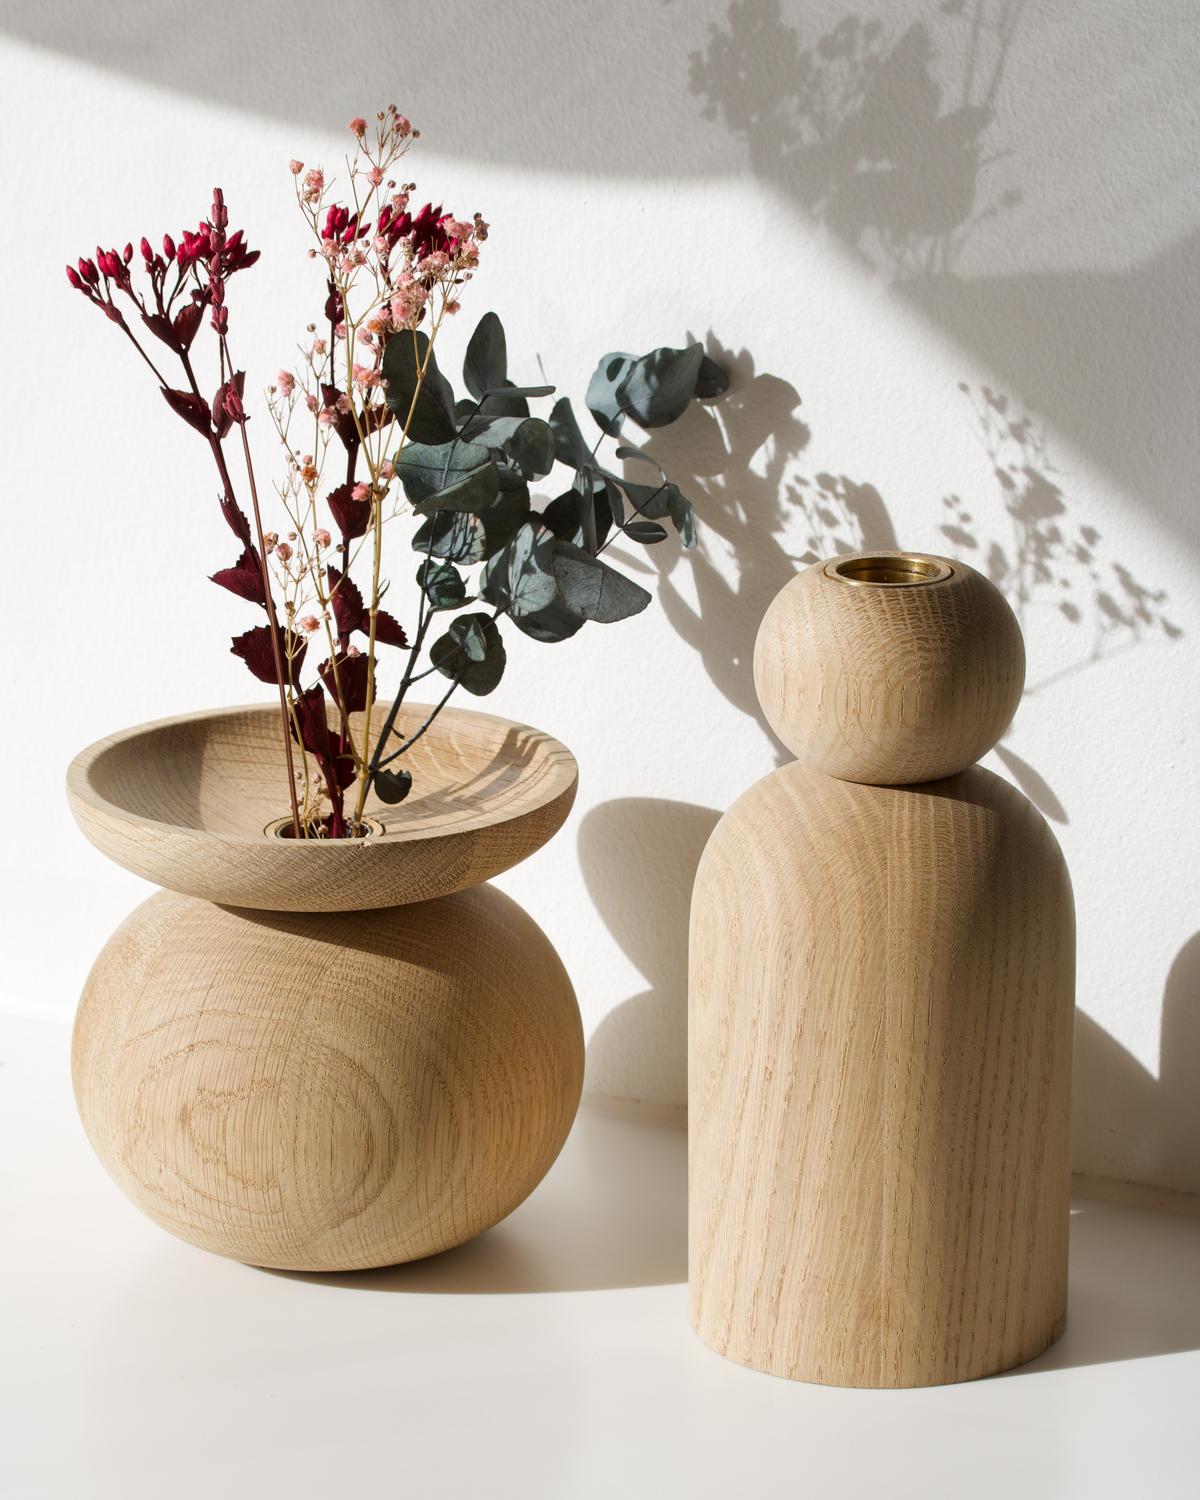 Bowl Shape Oak Vase by Applicata
Dimensions: D 13 x W 13 x H 14 cm
Materials: Oak.

Available in Ball, Cone, and Bowl shape.
Available in oak, smoked oak, and black stained oak.

The Shape vase collection is a series of sensuous objects with